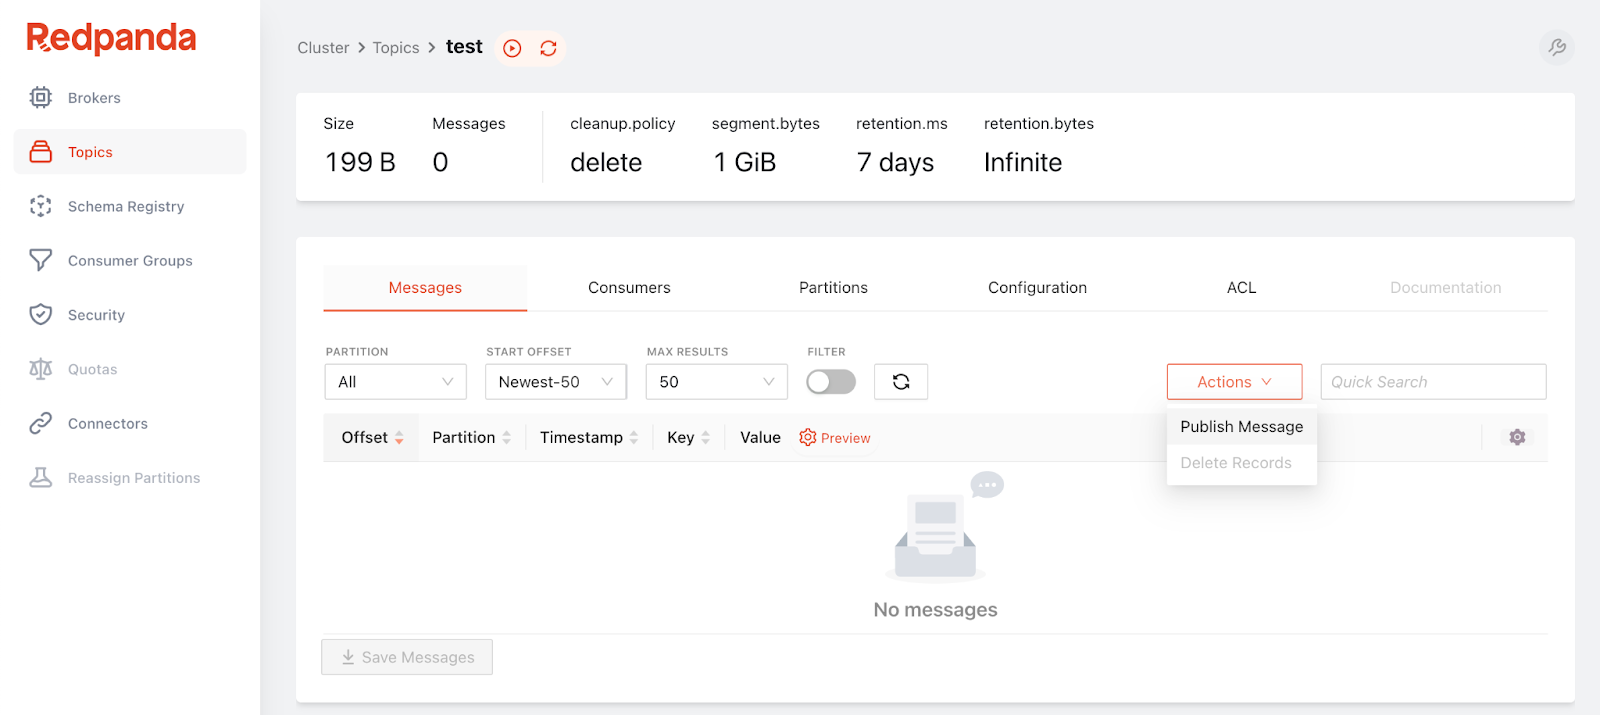 RedPanda UI with our test topic